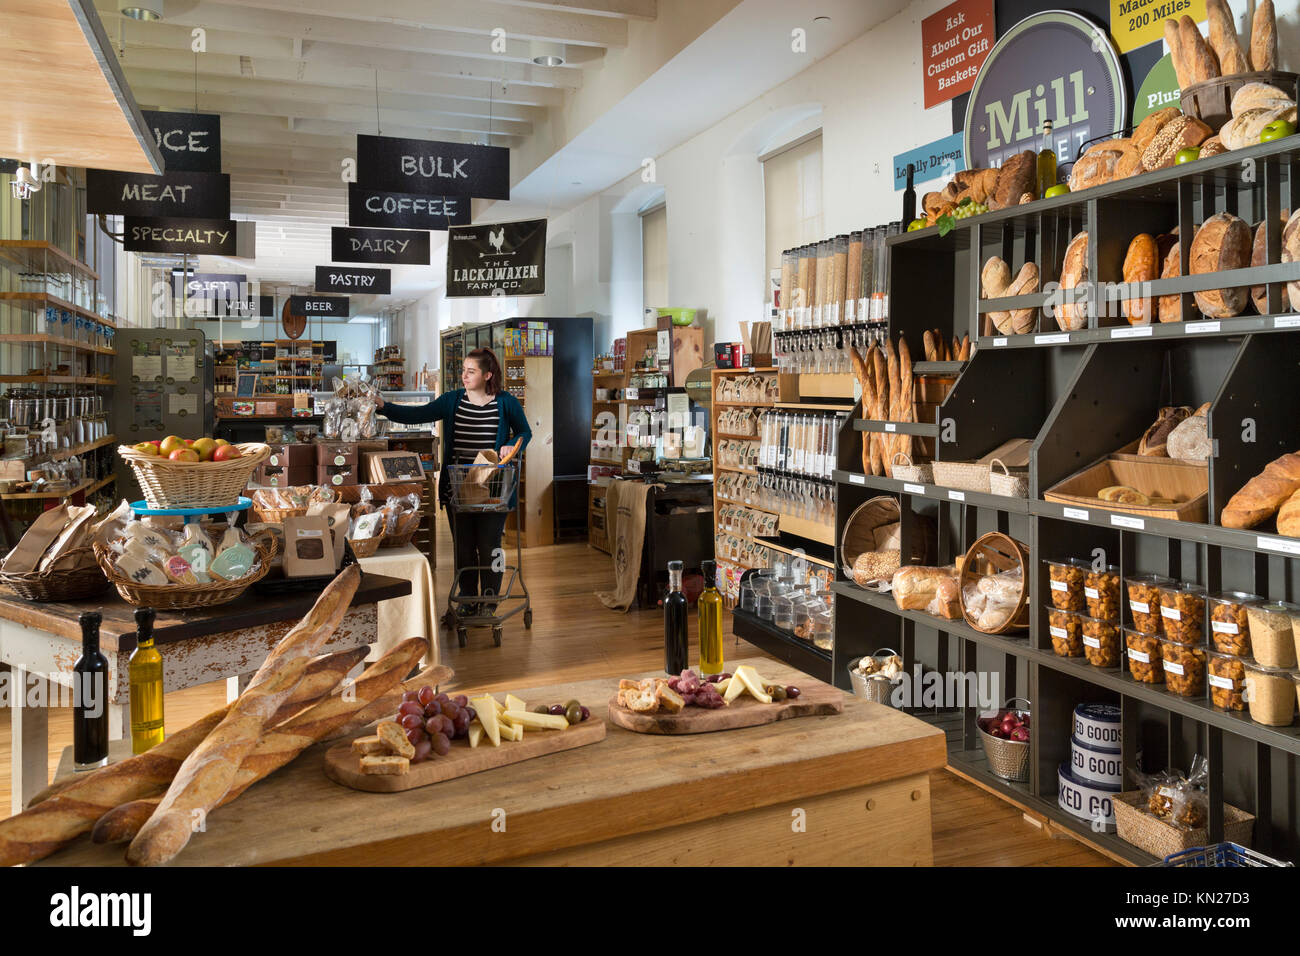 Shopper in Market with a local Products Focus, The Mill Market, Hawley, Pennsylvania, USA, Stock Photo